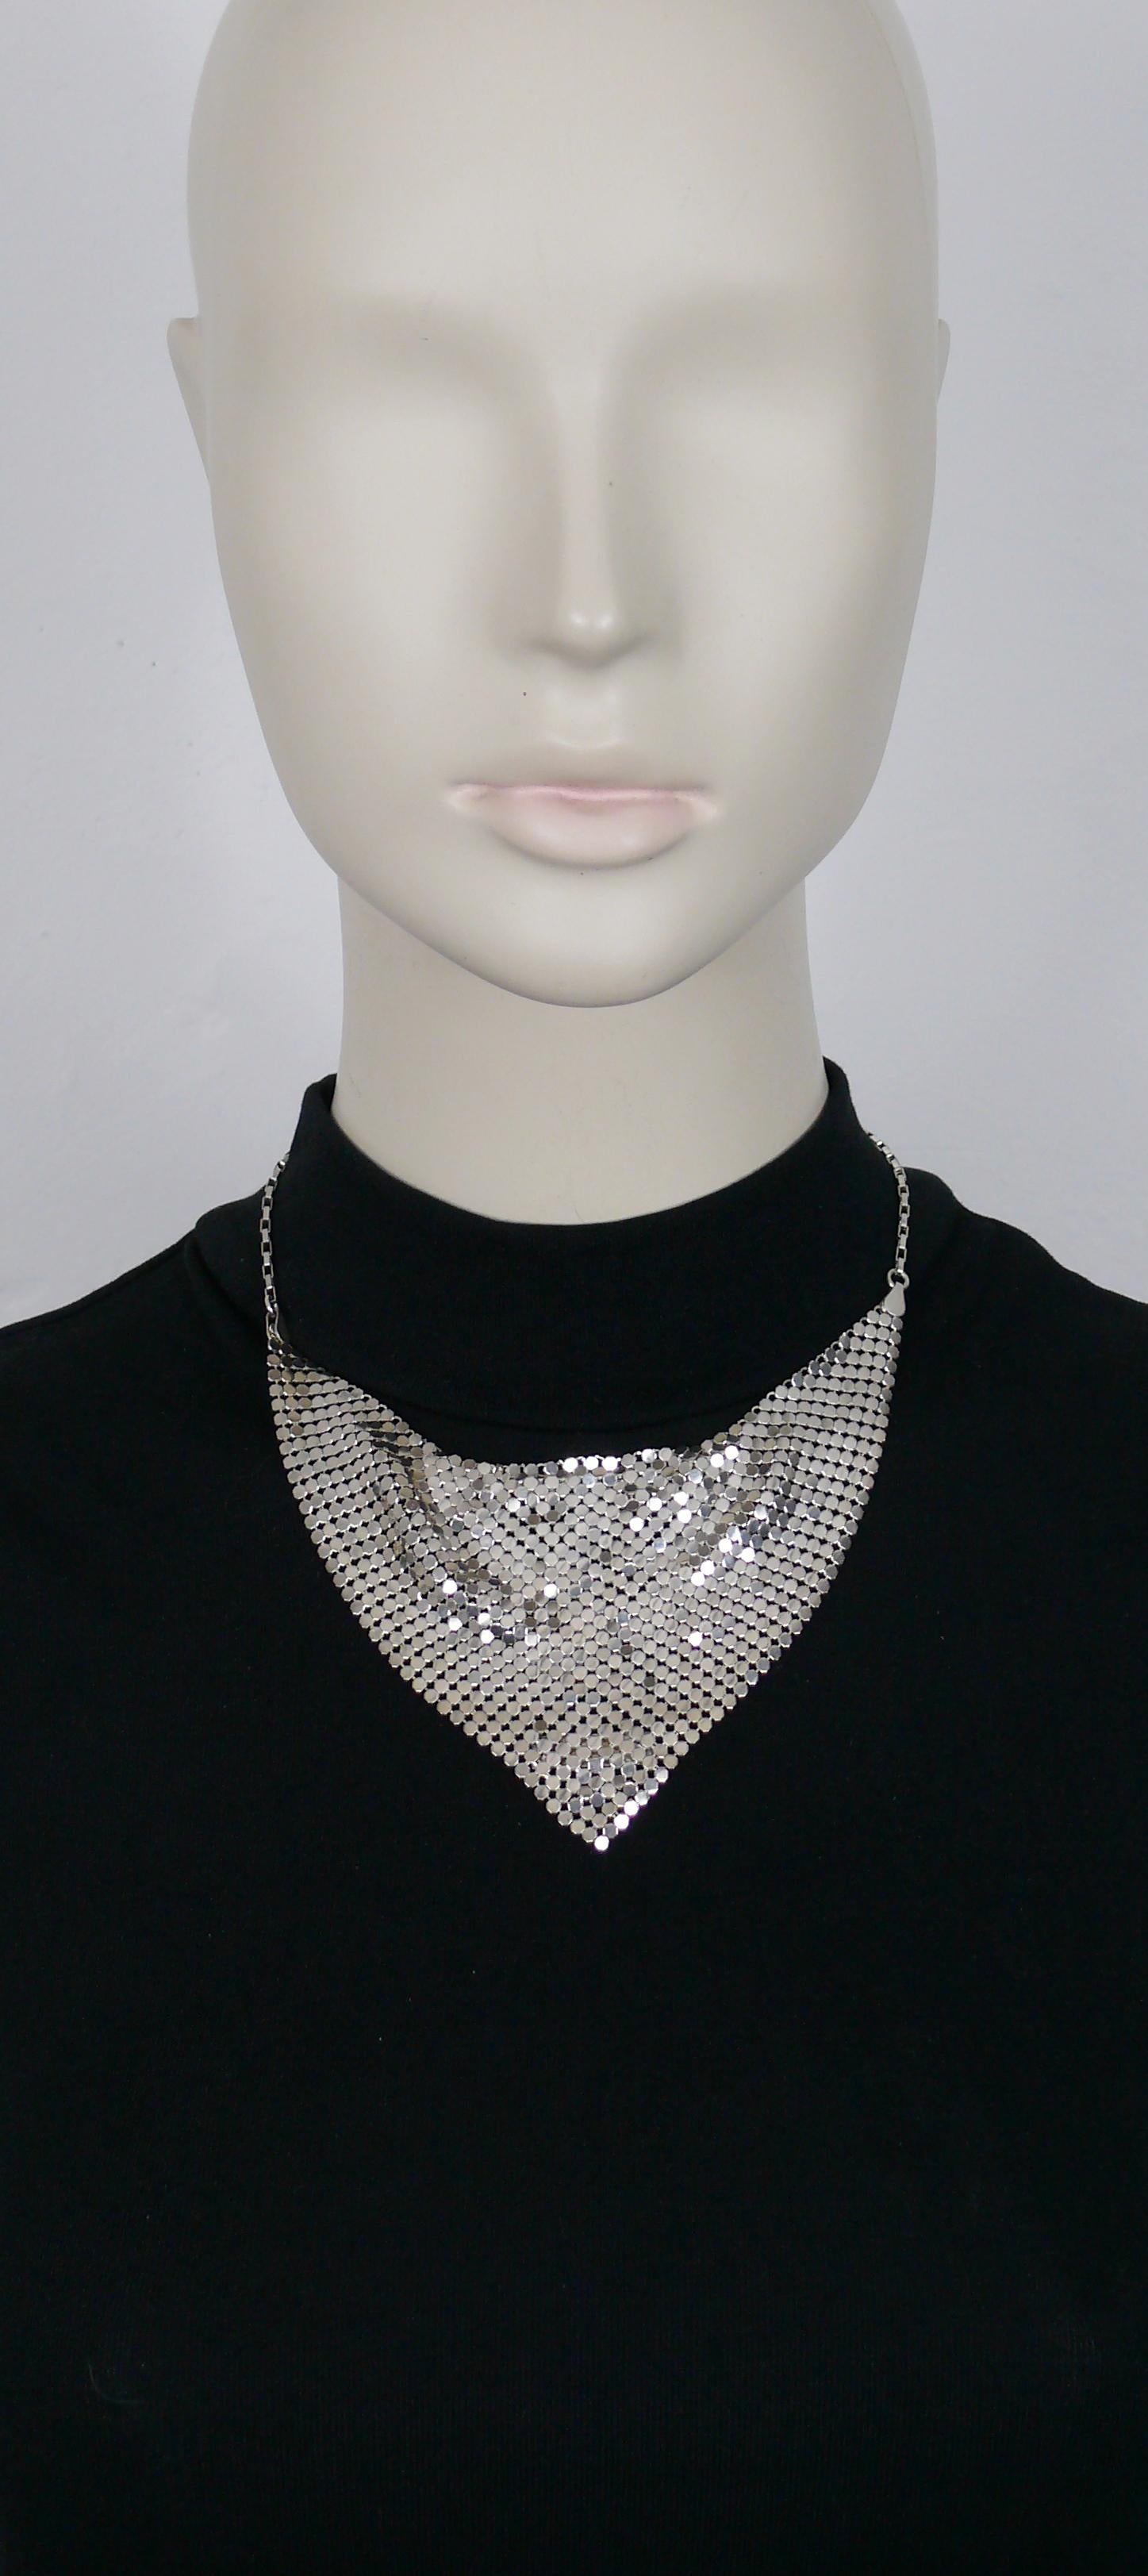 PACO RABANNE vintage silver toned mesh metal necklace.

Silver tone metal hardware.

Lobster clasp closure.

Embossed PACO RABANNE.

Indicative measurements : length approx. 41.5 cm (16.34 inches) / drop center height approx. 9 cm (3.54